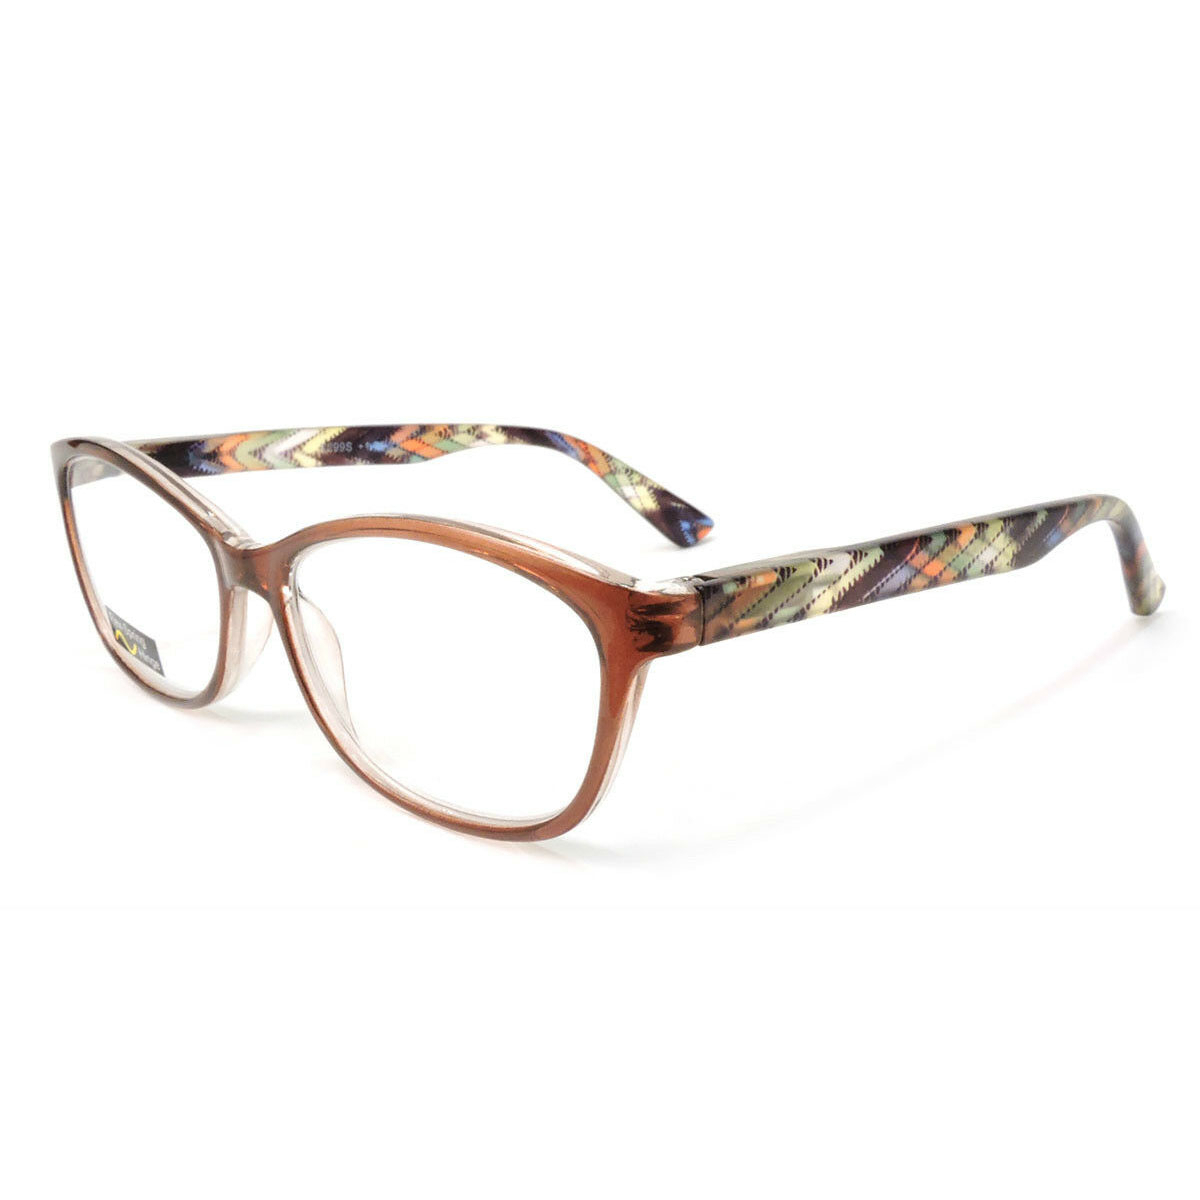 Classic Frame Reading Glasses Colorful Arms Retro Vintage Style - Brown, +1.50